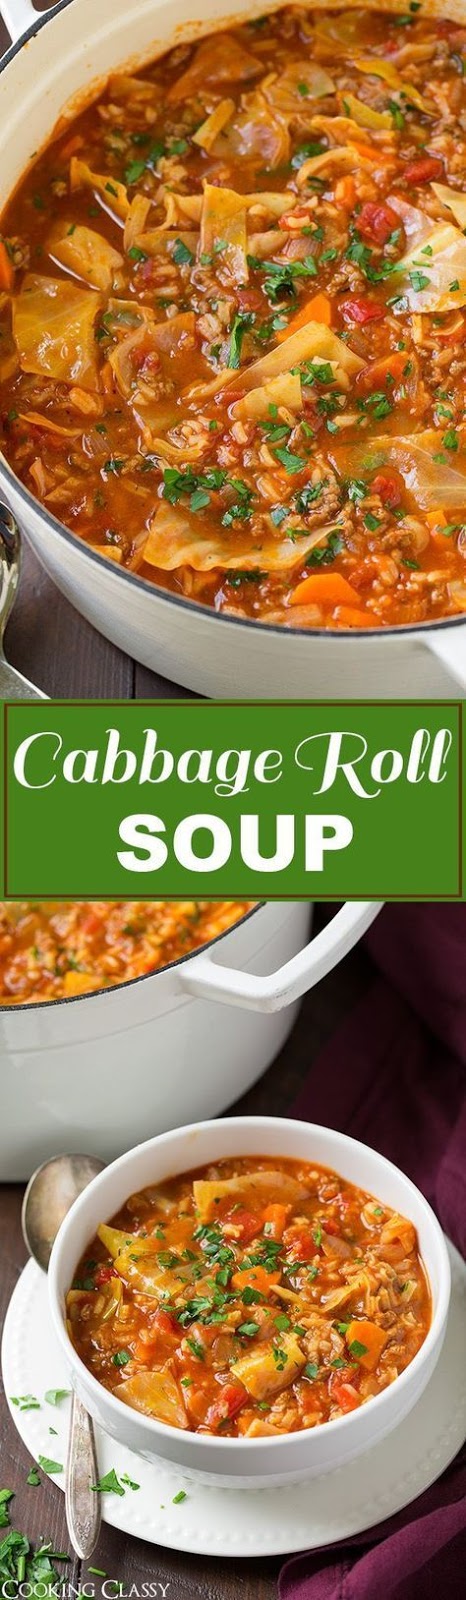 Cabbage Roll Soup Recipes